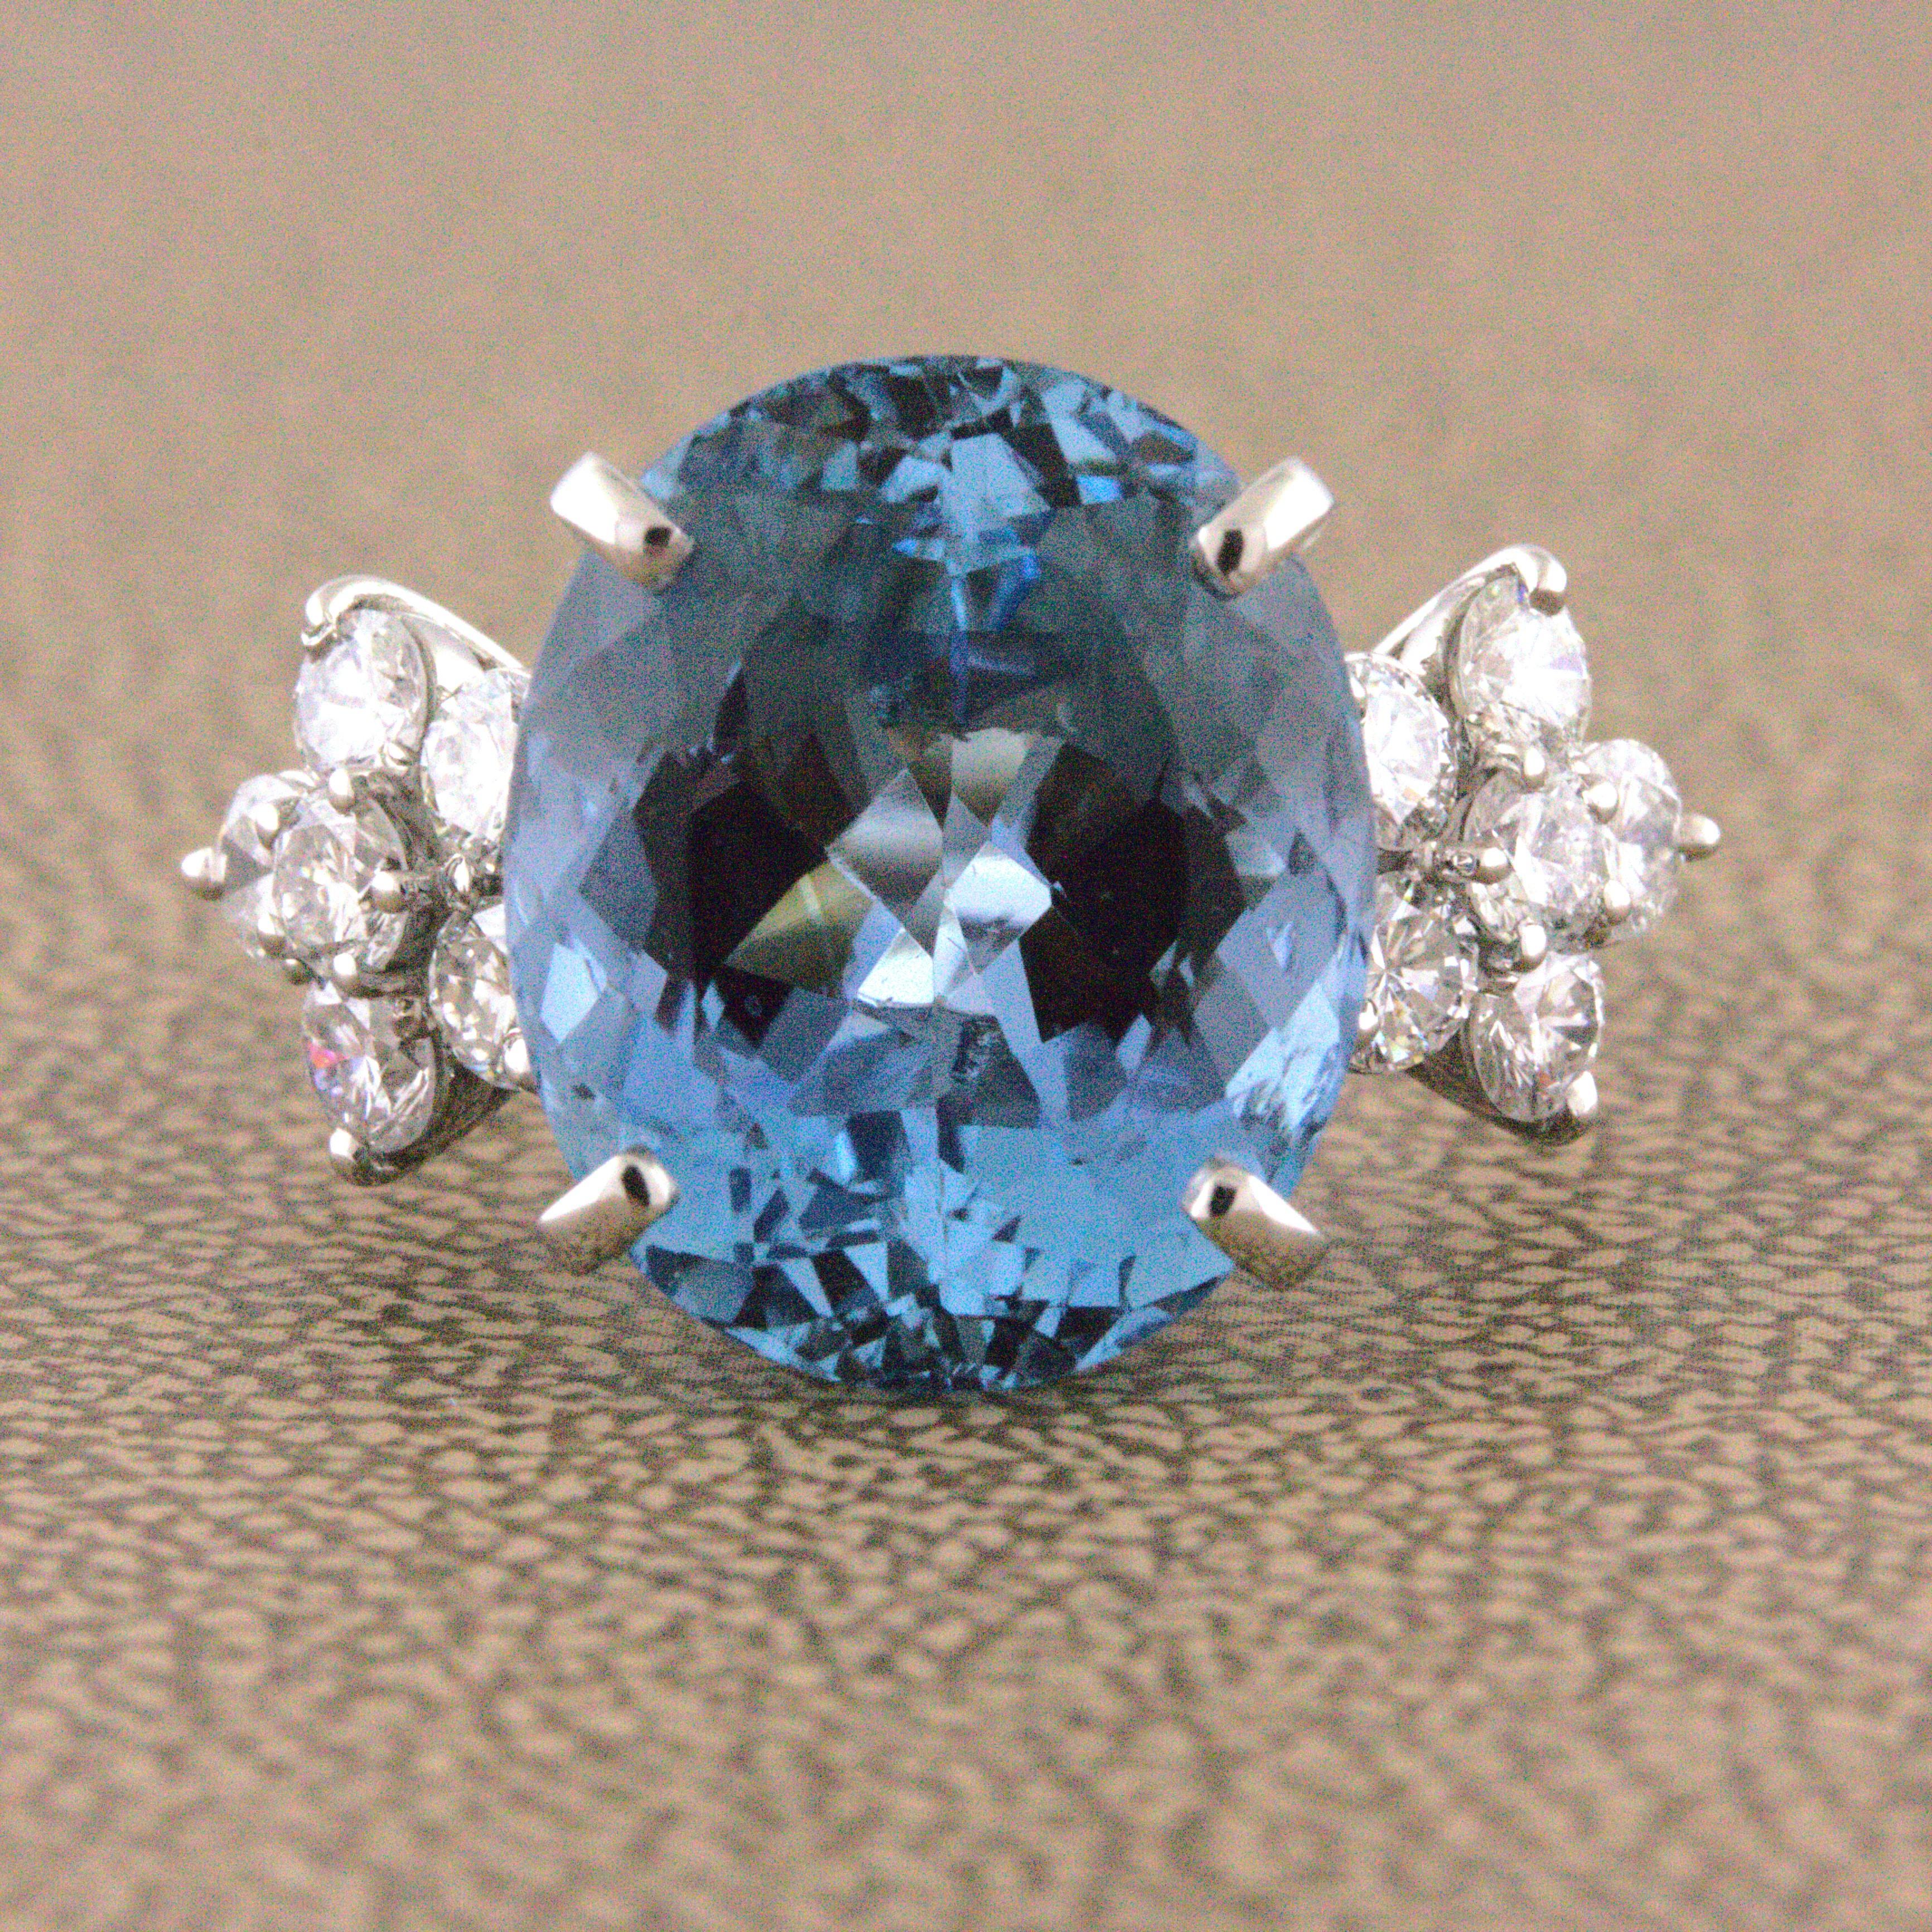 Simply stunning, this is one of the finest aquamarines on the market. The oval-shaped gem weighs an impressive 8.21 carats and has the most rich and intense sea-blue color. The color is so fine that in the trade this type of aquamarine is called